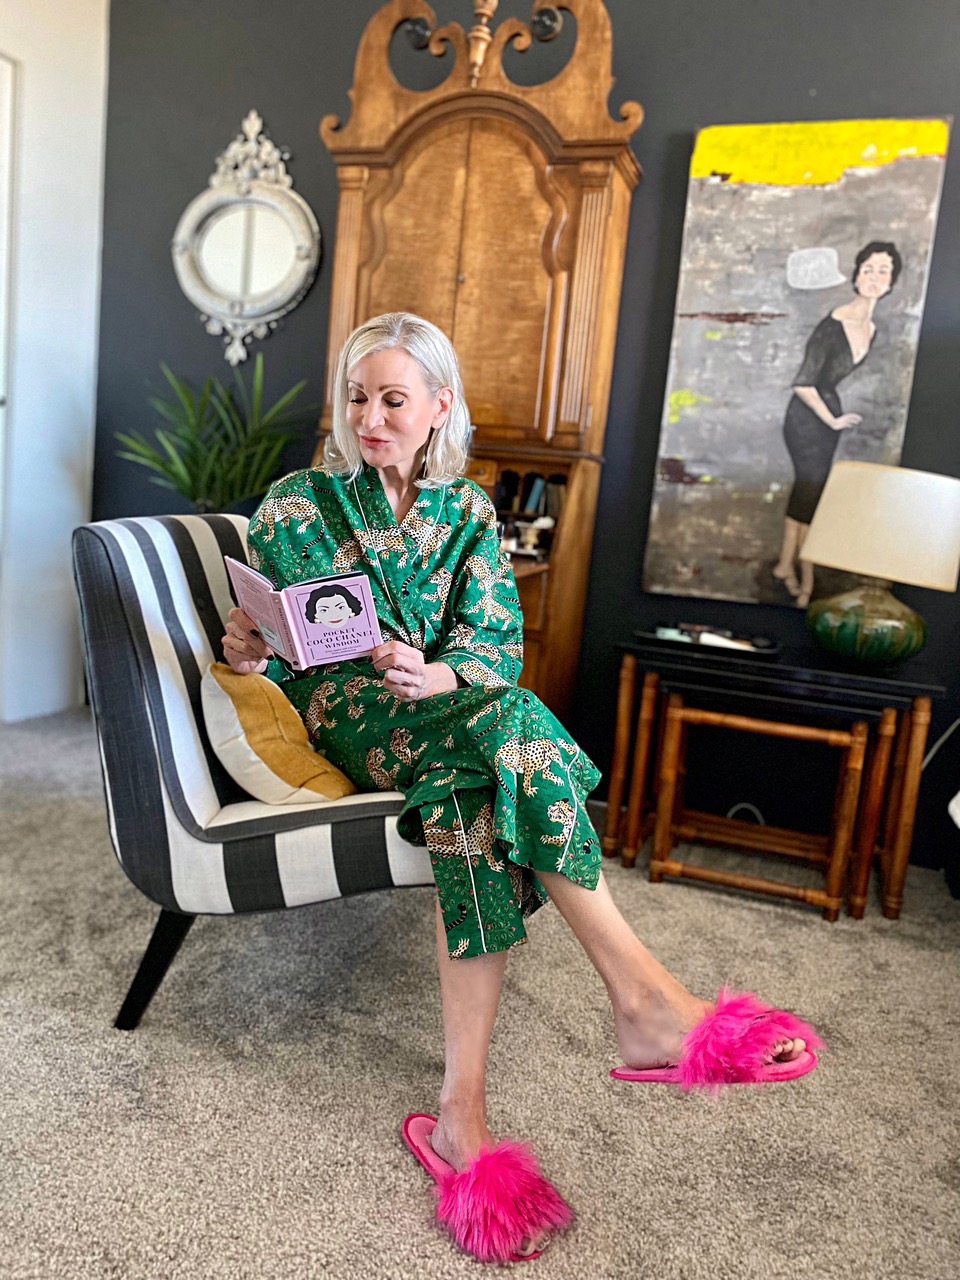 Lifestyle Influencer, Jamie Lewinger of More Than Turquoise, wearing Bagheera Flannel robe from Printfresh